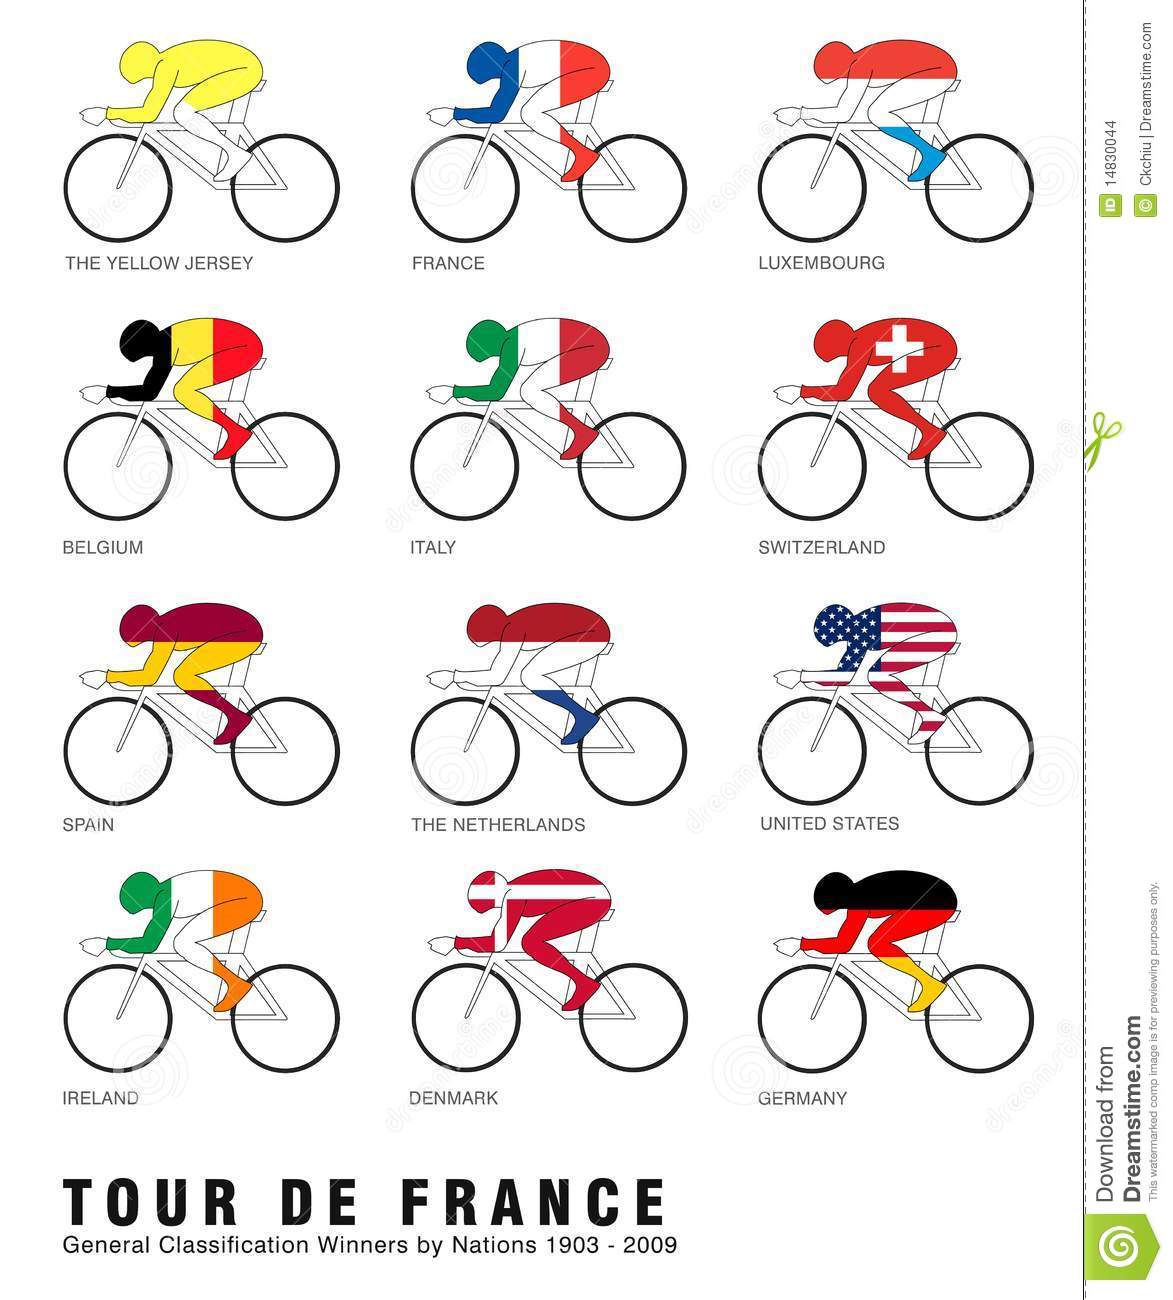 11 Nations Have Wore The Famous Yellow Jersey In The Tour De France